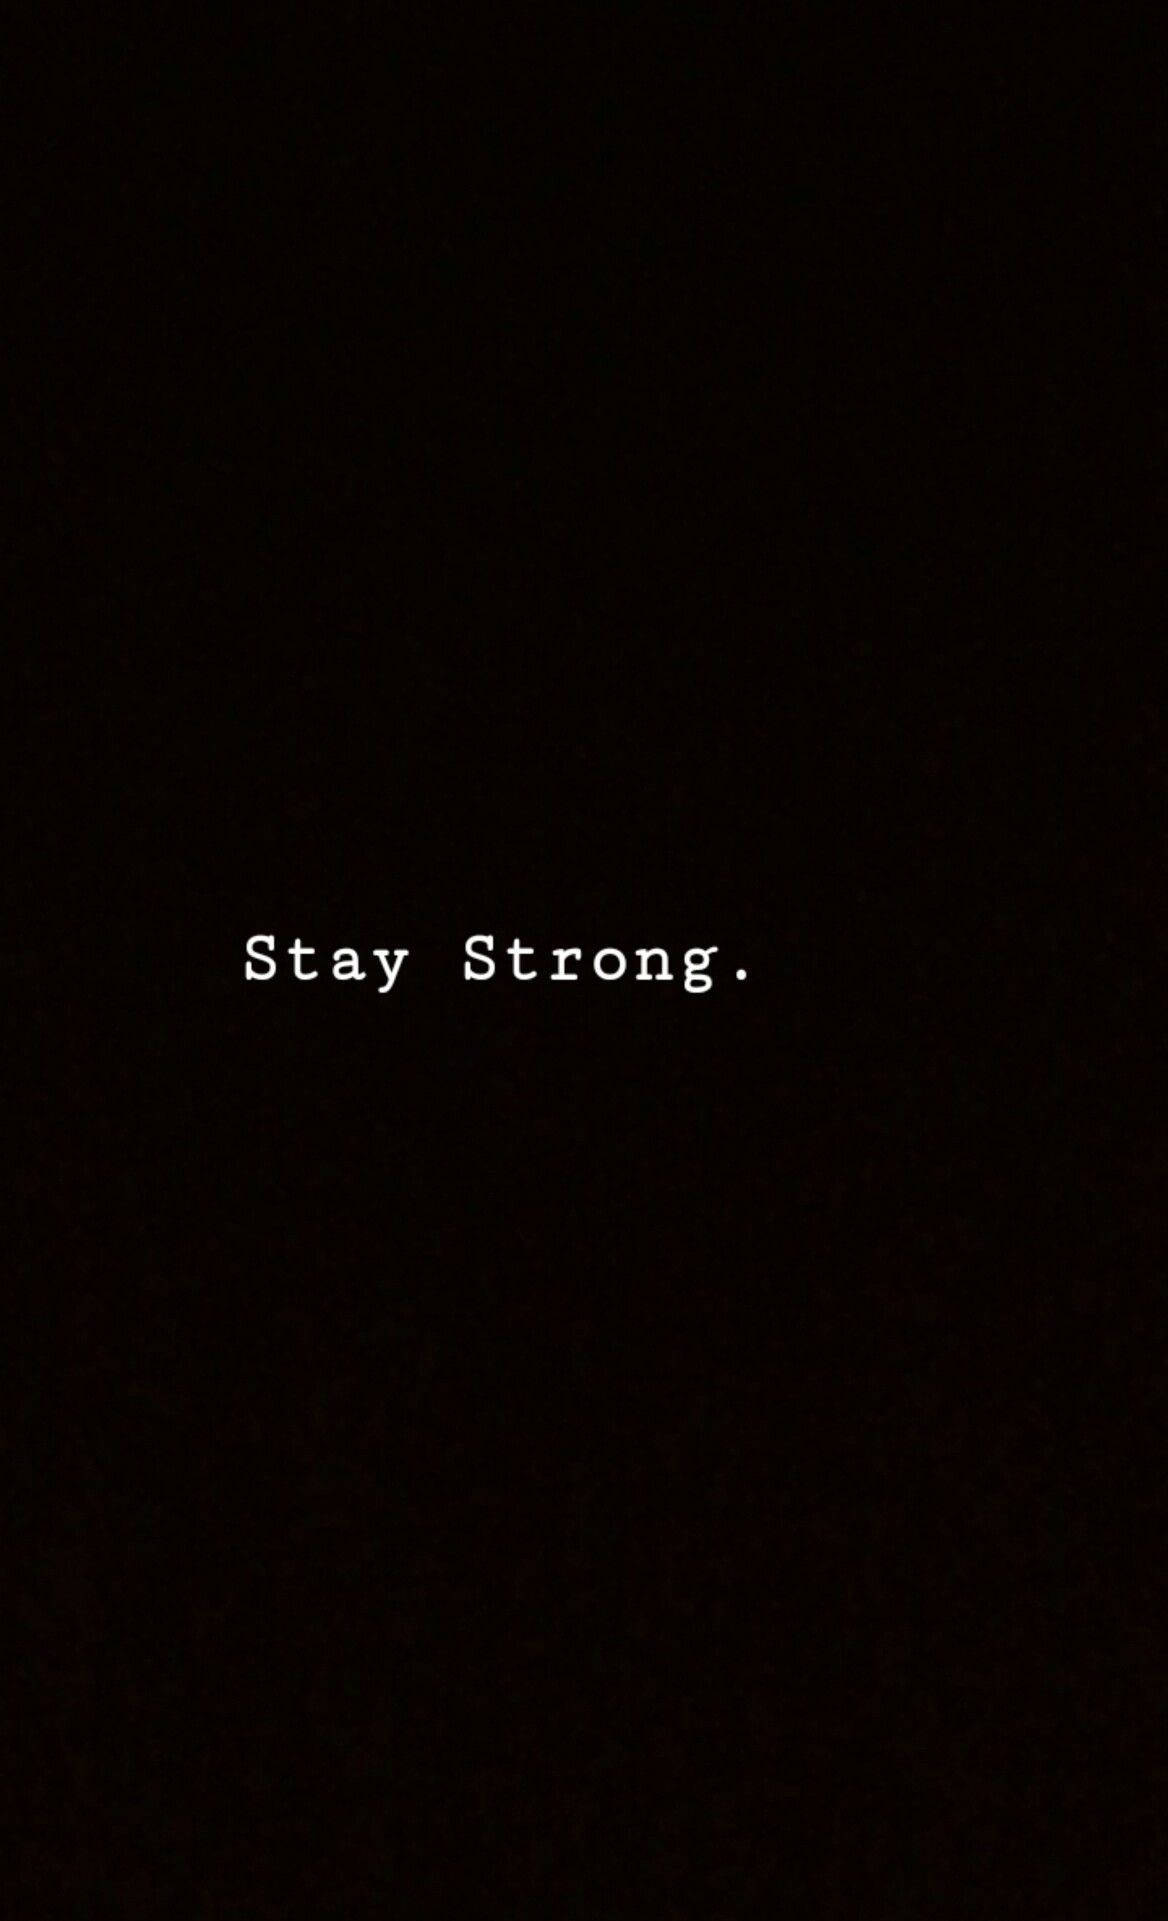 Sad Aesthetic Tumblr Dark Stay Strong Background